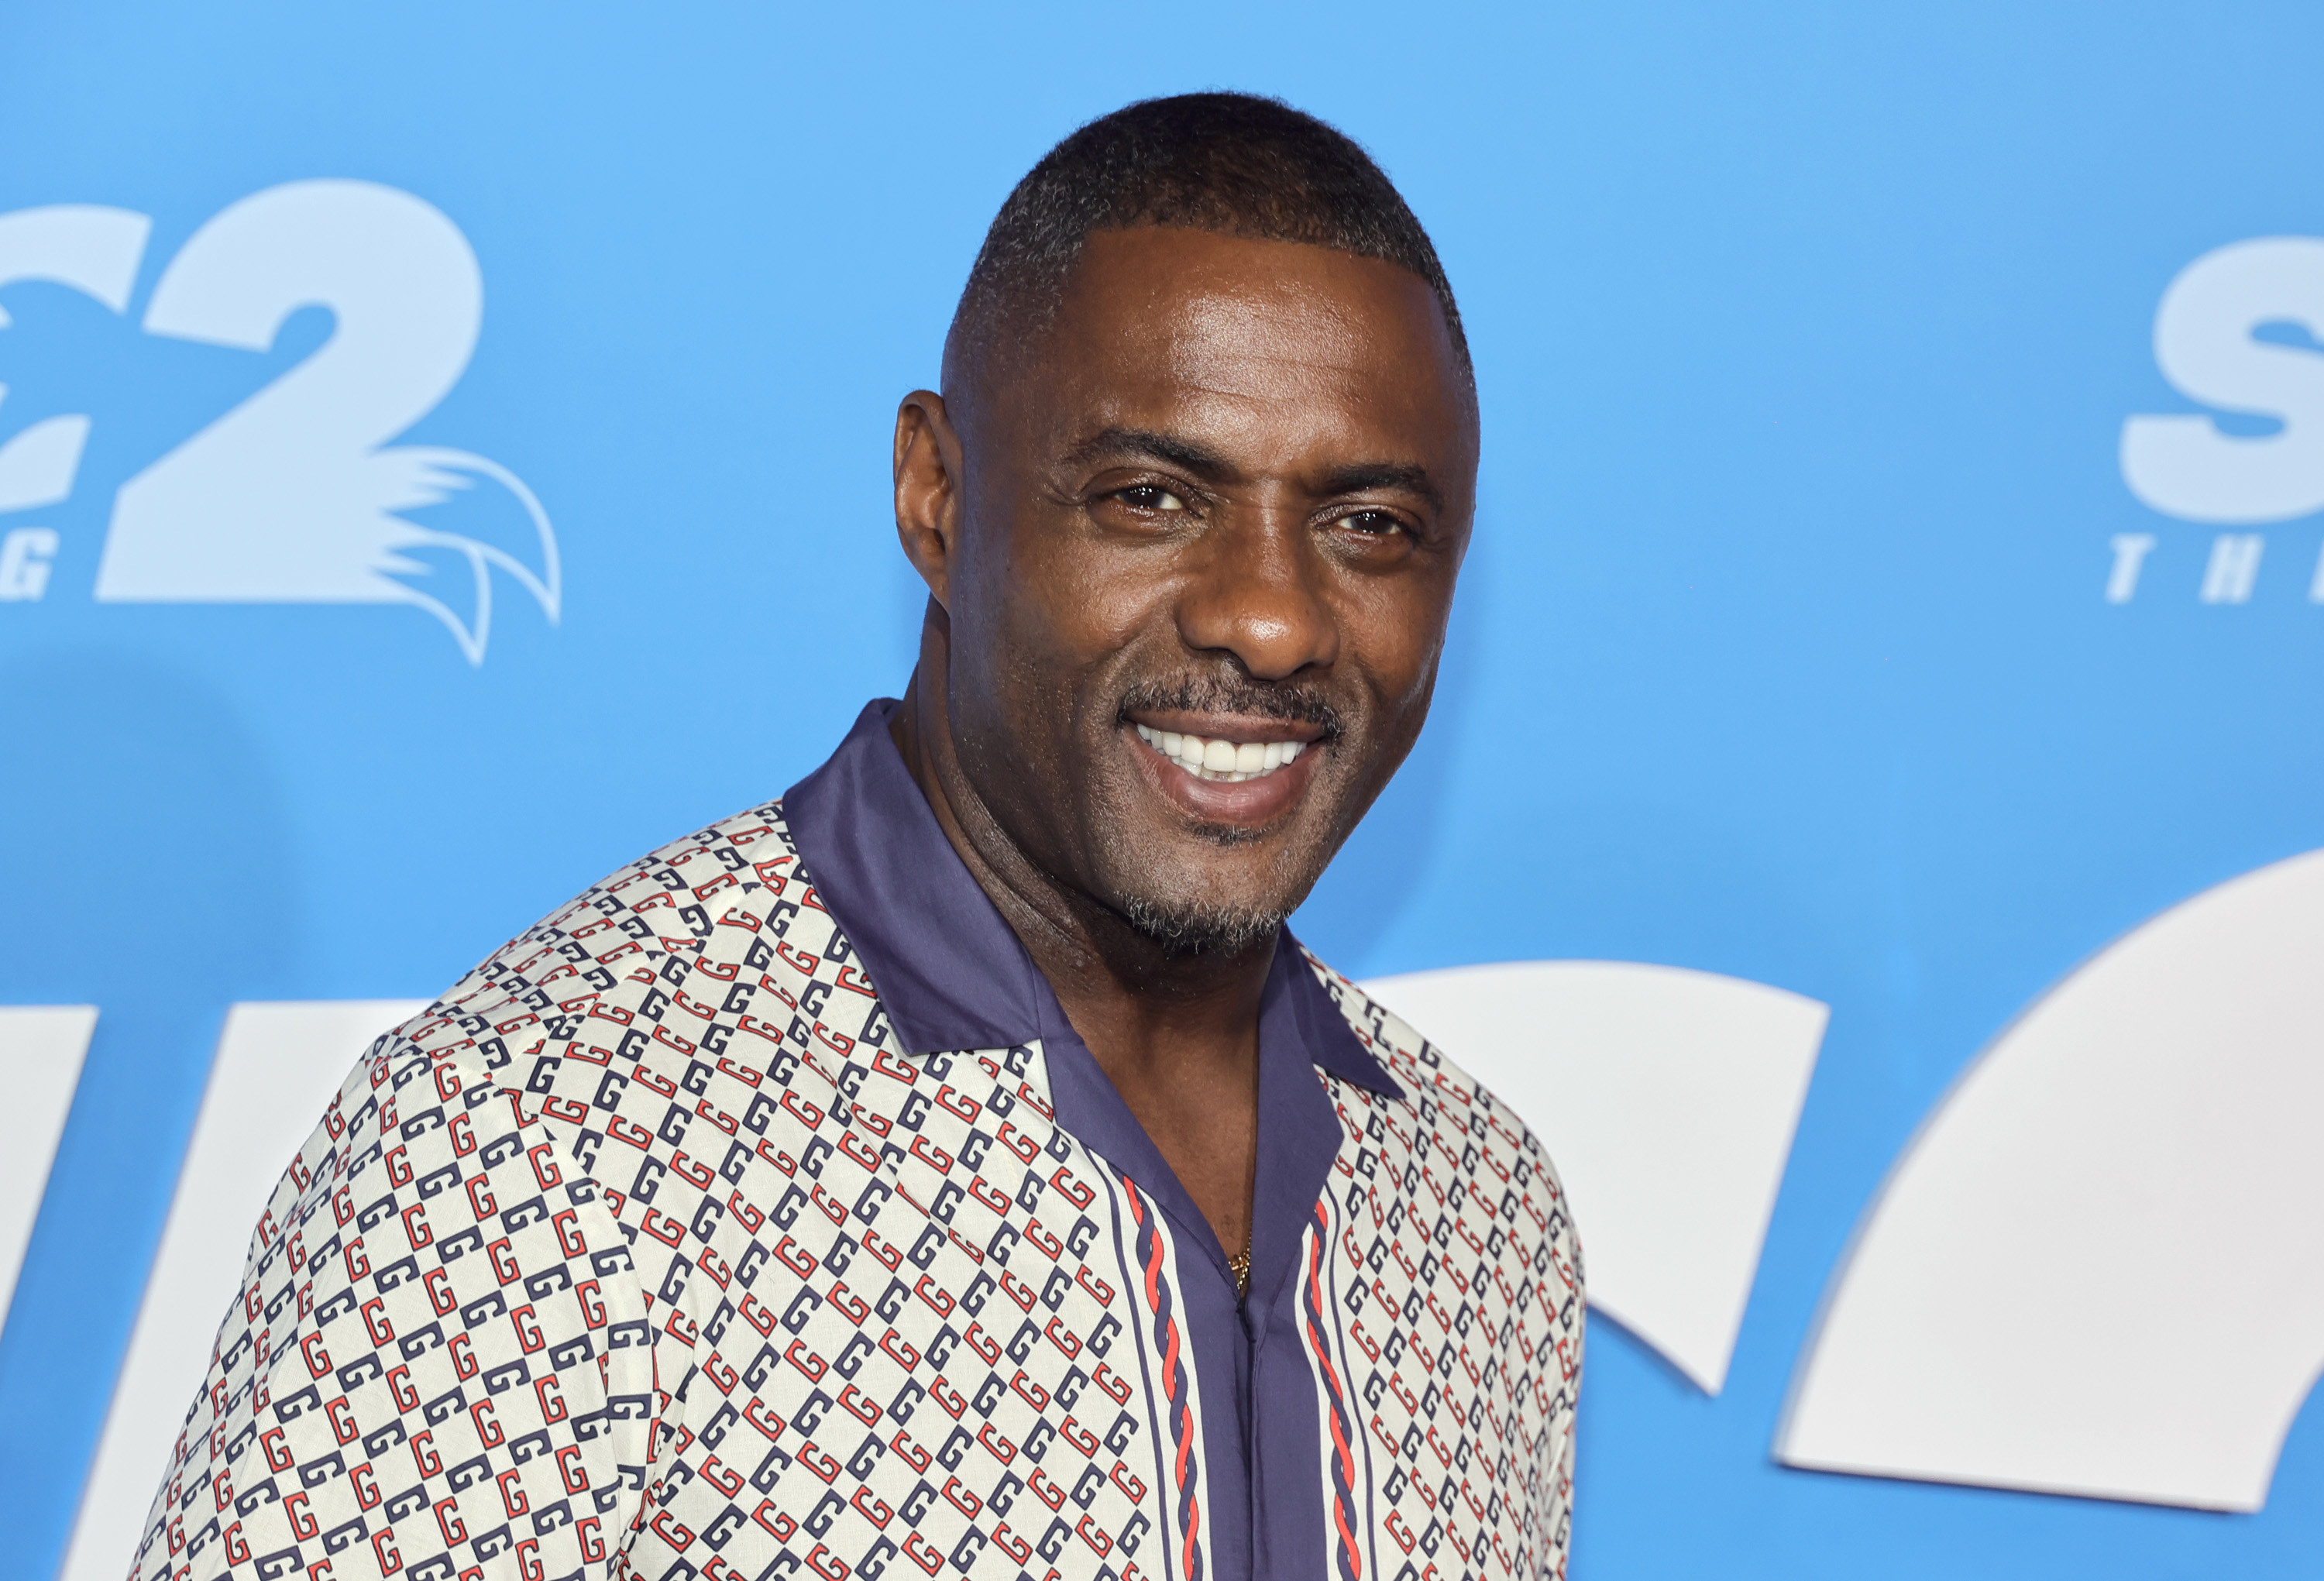 Idris Elba at an event for Sonic 2 film